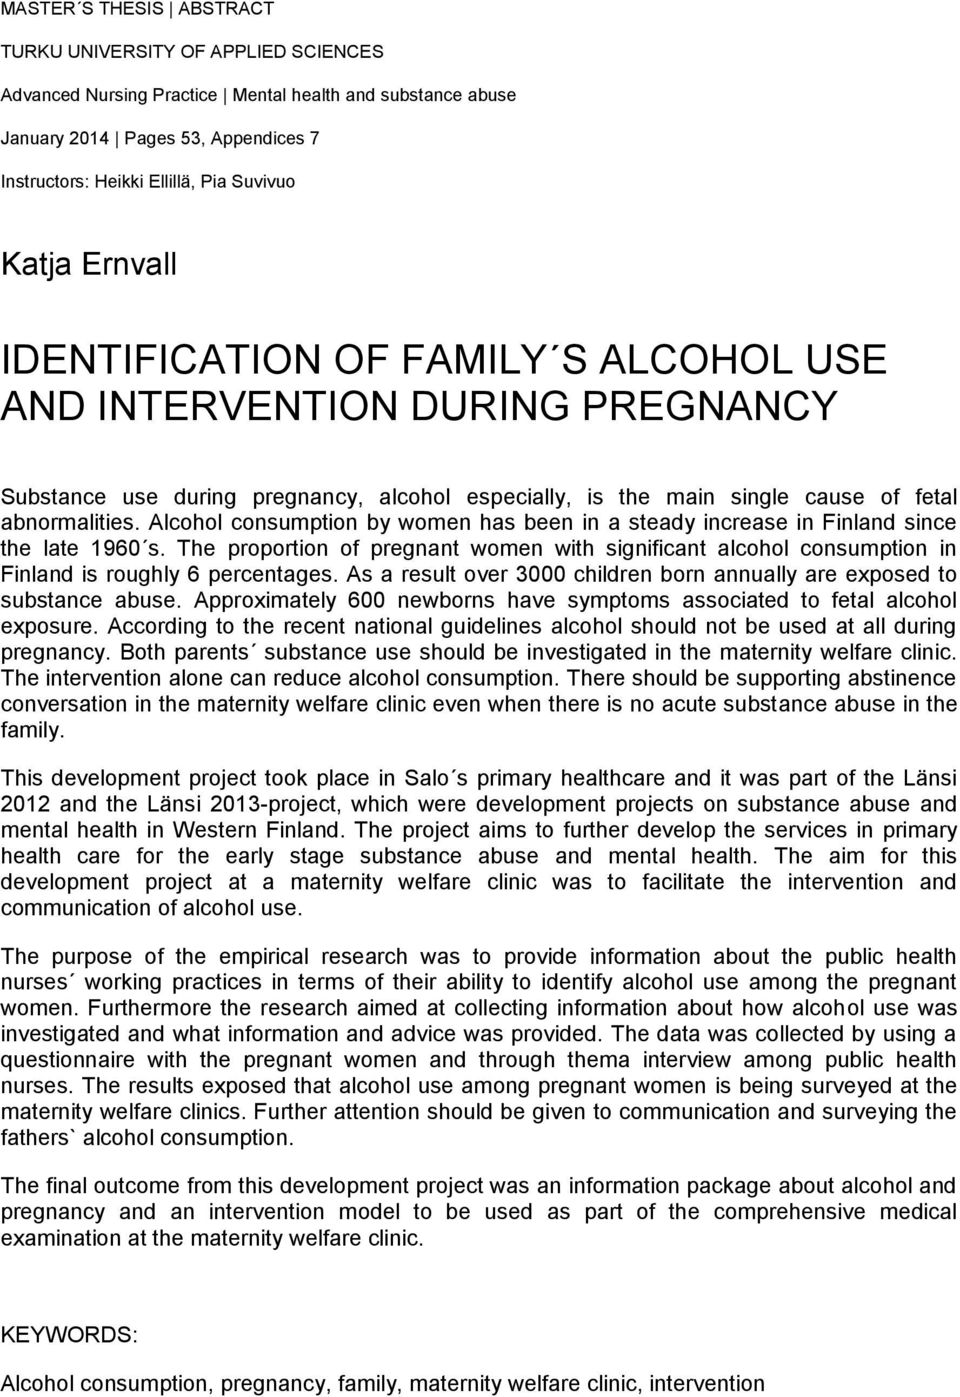 Alcohol consumption by women has been in a steady increase in Finland since the late 1960 s. The proportion of pregnant women with significant alcohol consumption in Finland is roughly 6 percentages.